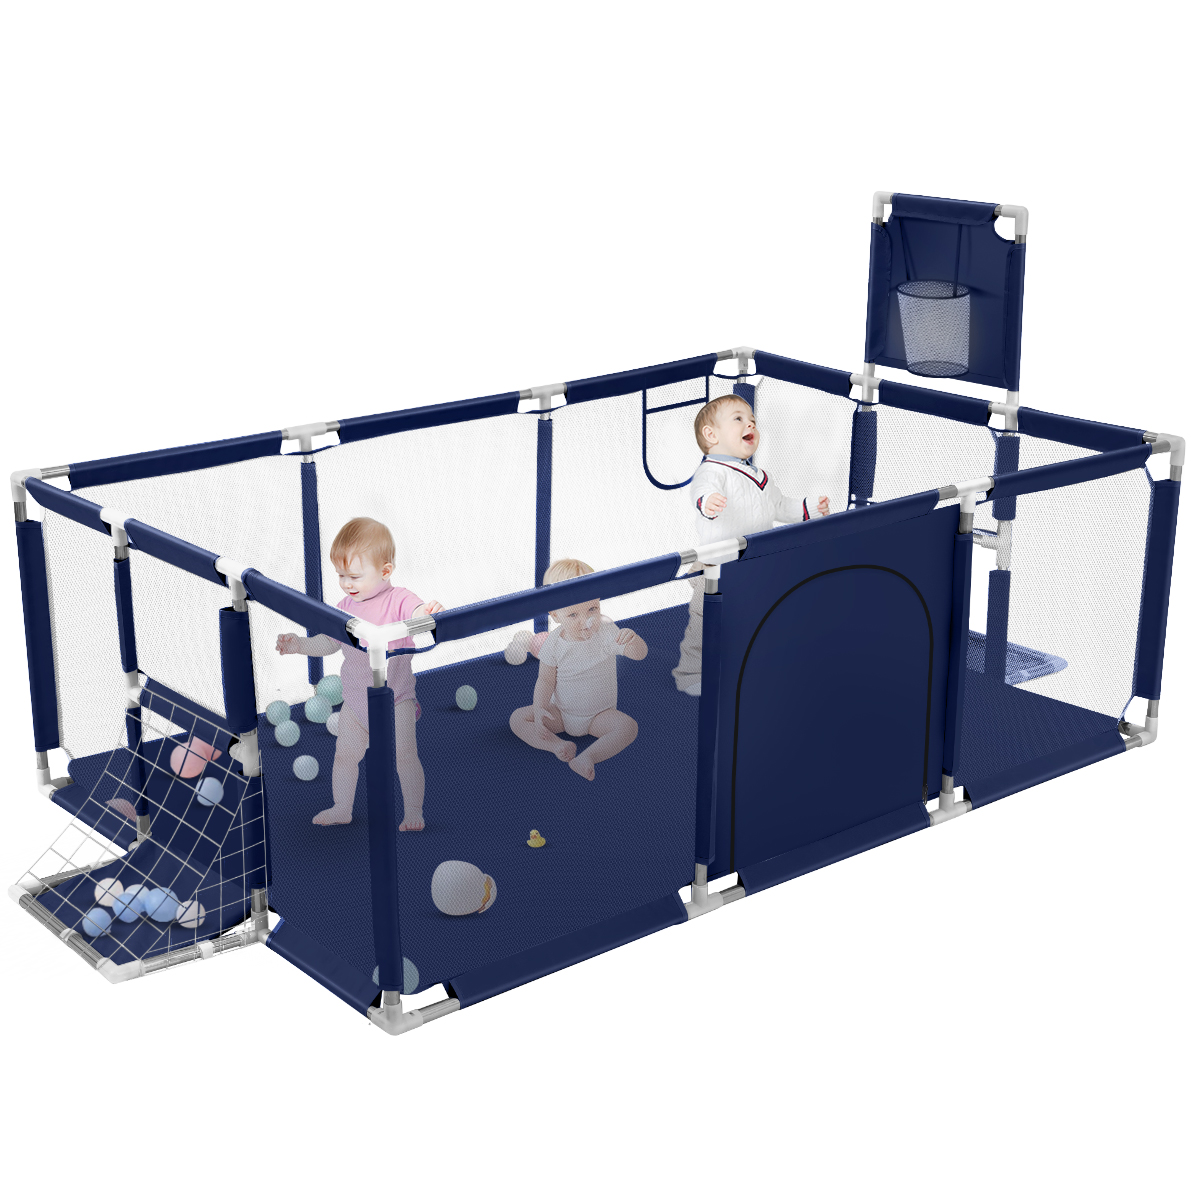 Baby Playpen,71 Inch Extra Large Baby Playard With Basketball Hoop and Breathable Mesh,Children Kids Play Fence for Indoors Outdoors,Blue - image 1 of 7